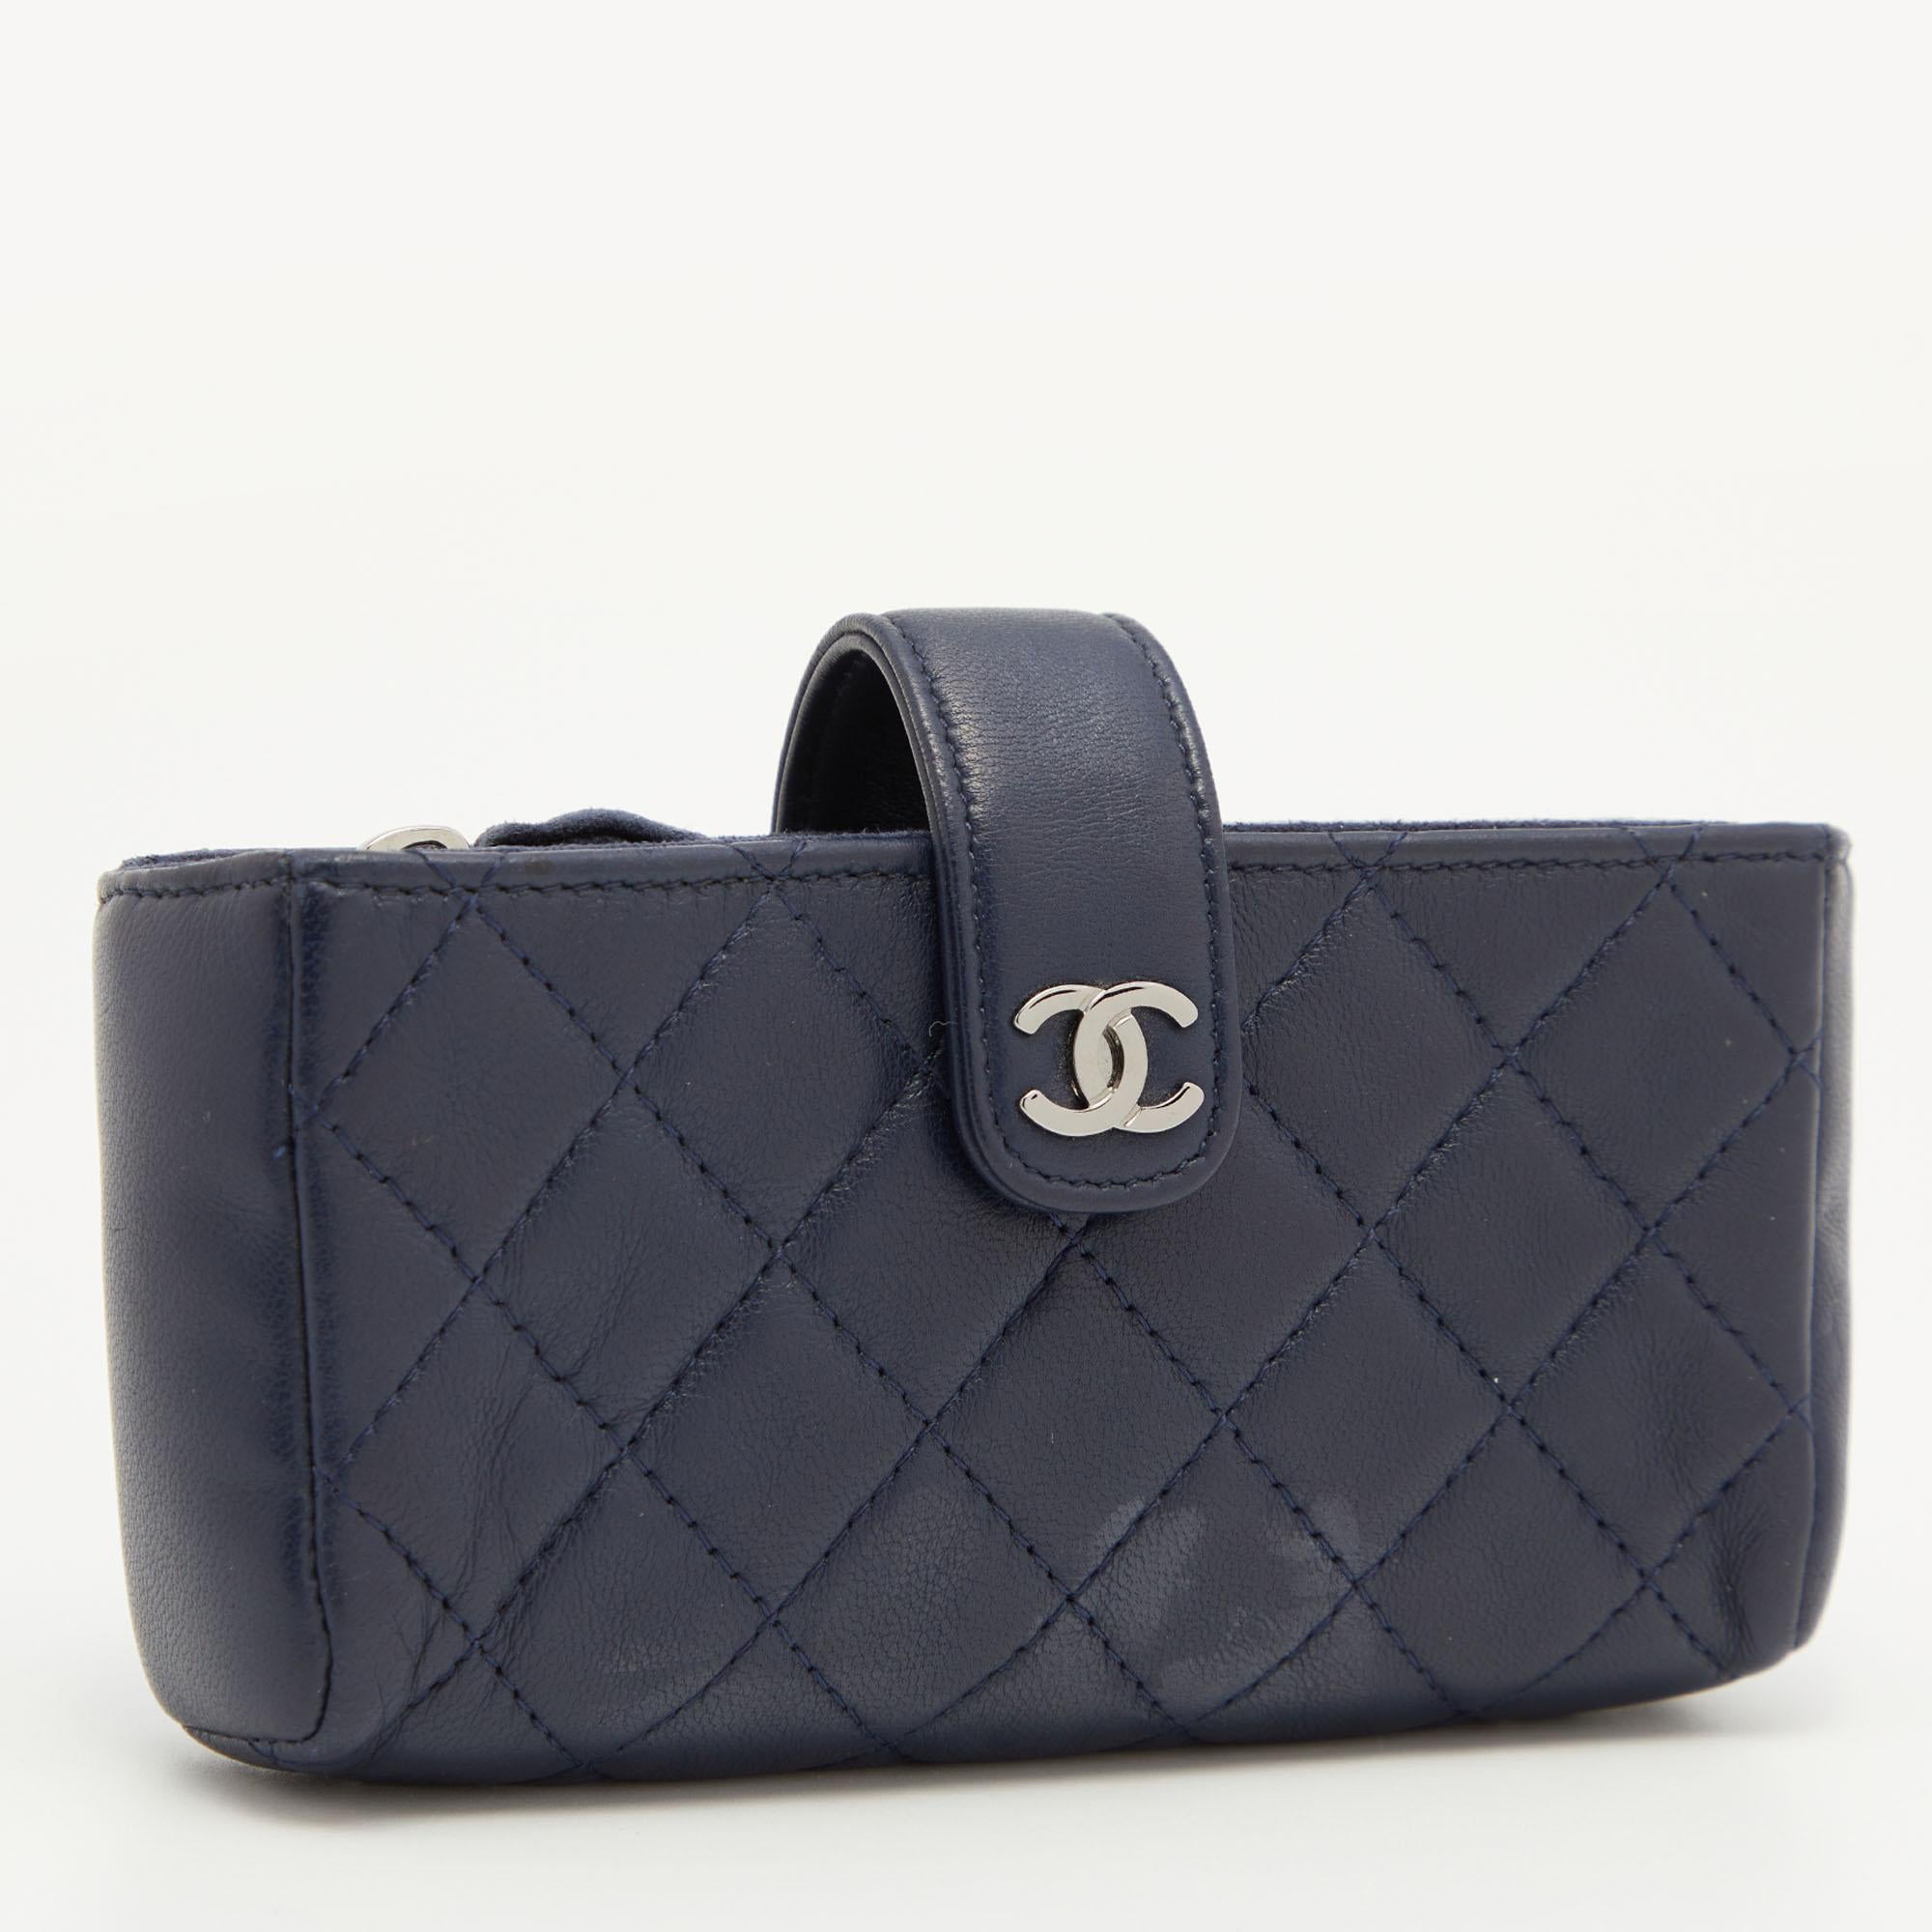 Black Chanel Blue Quilted Leather CC Phone Pouch